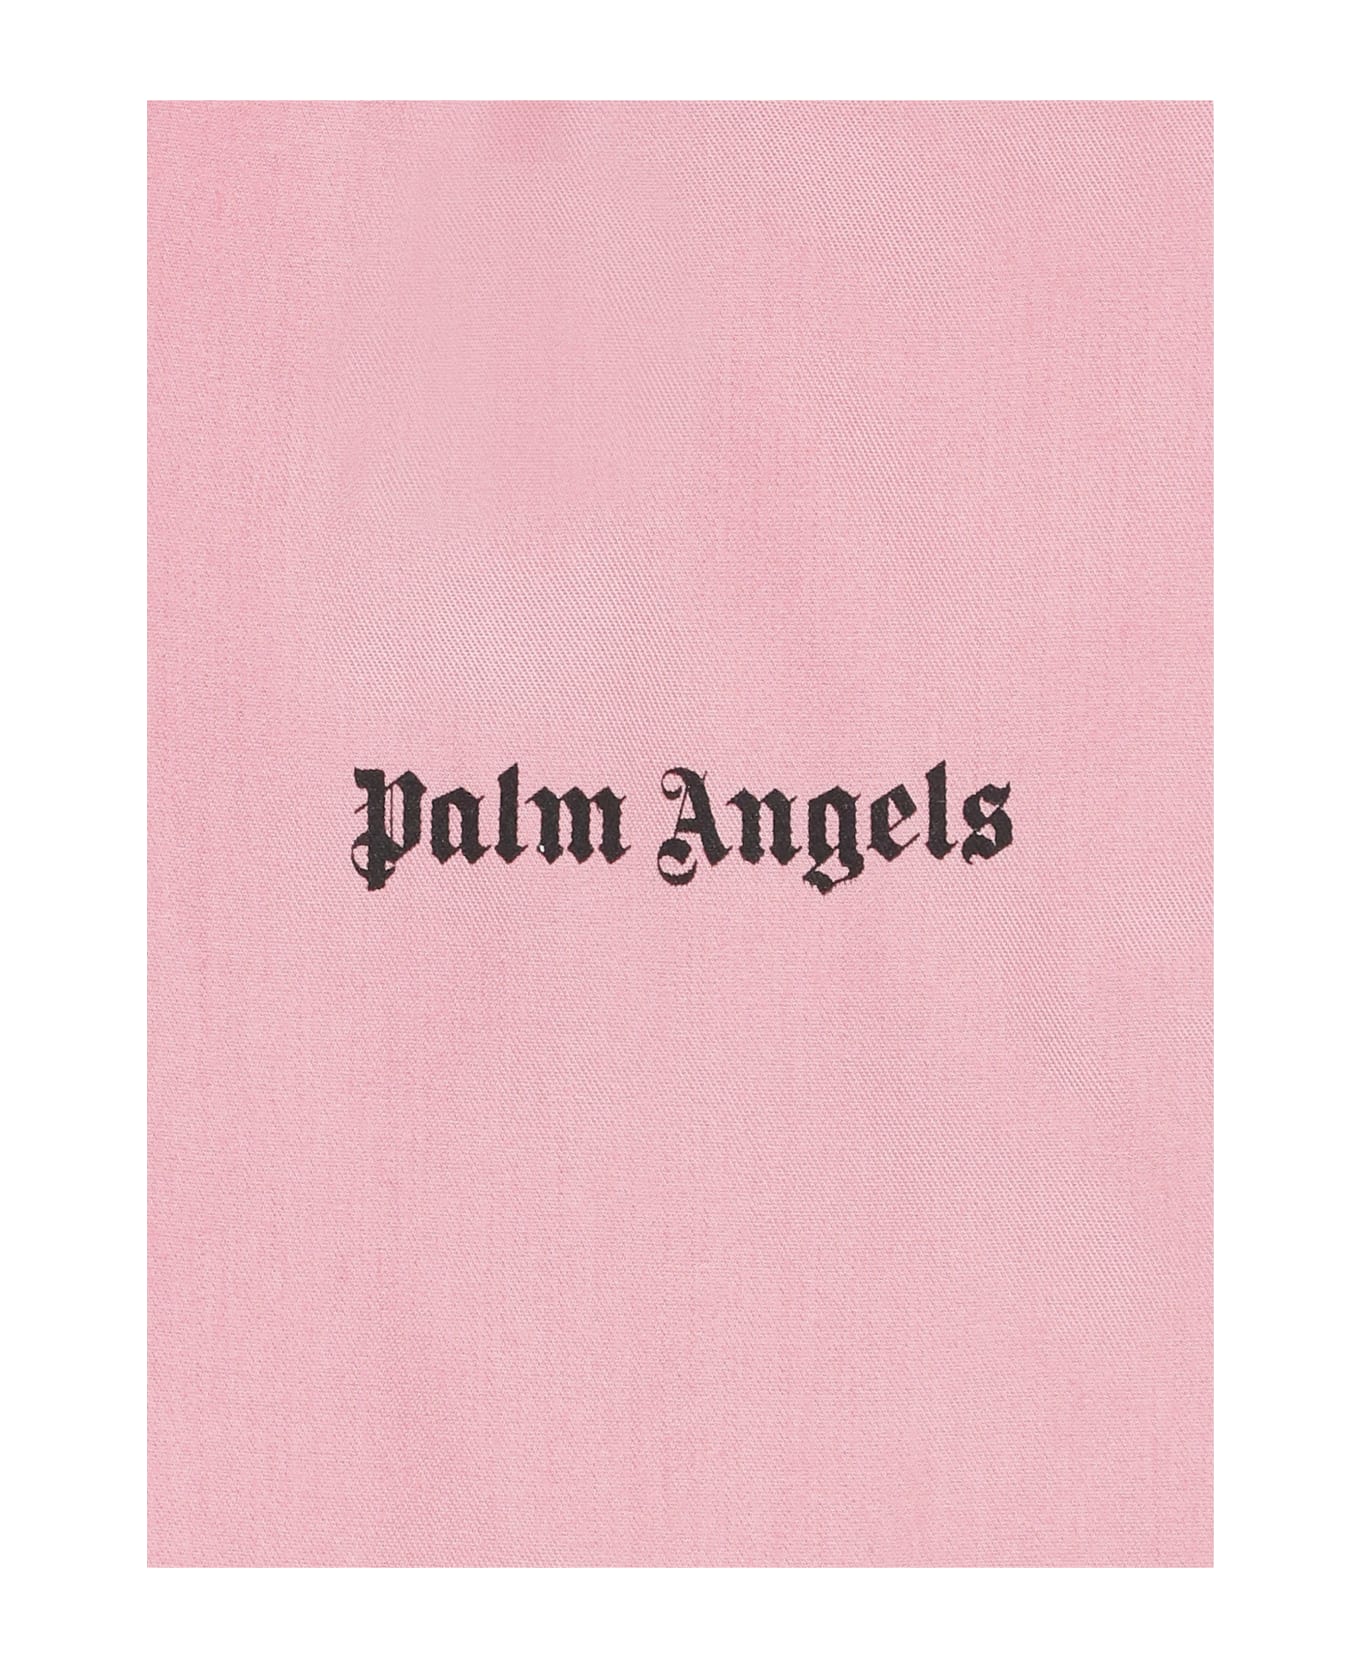 Palm Angels Pants With Logo - Pink